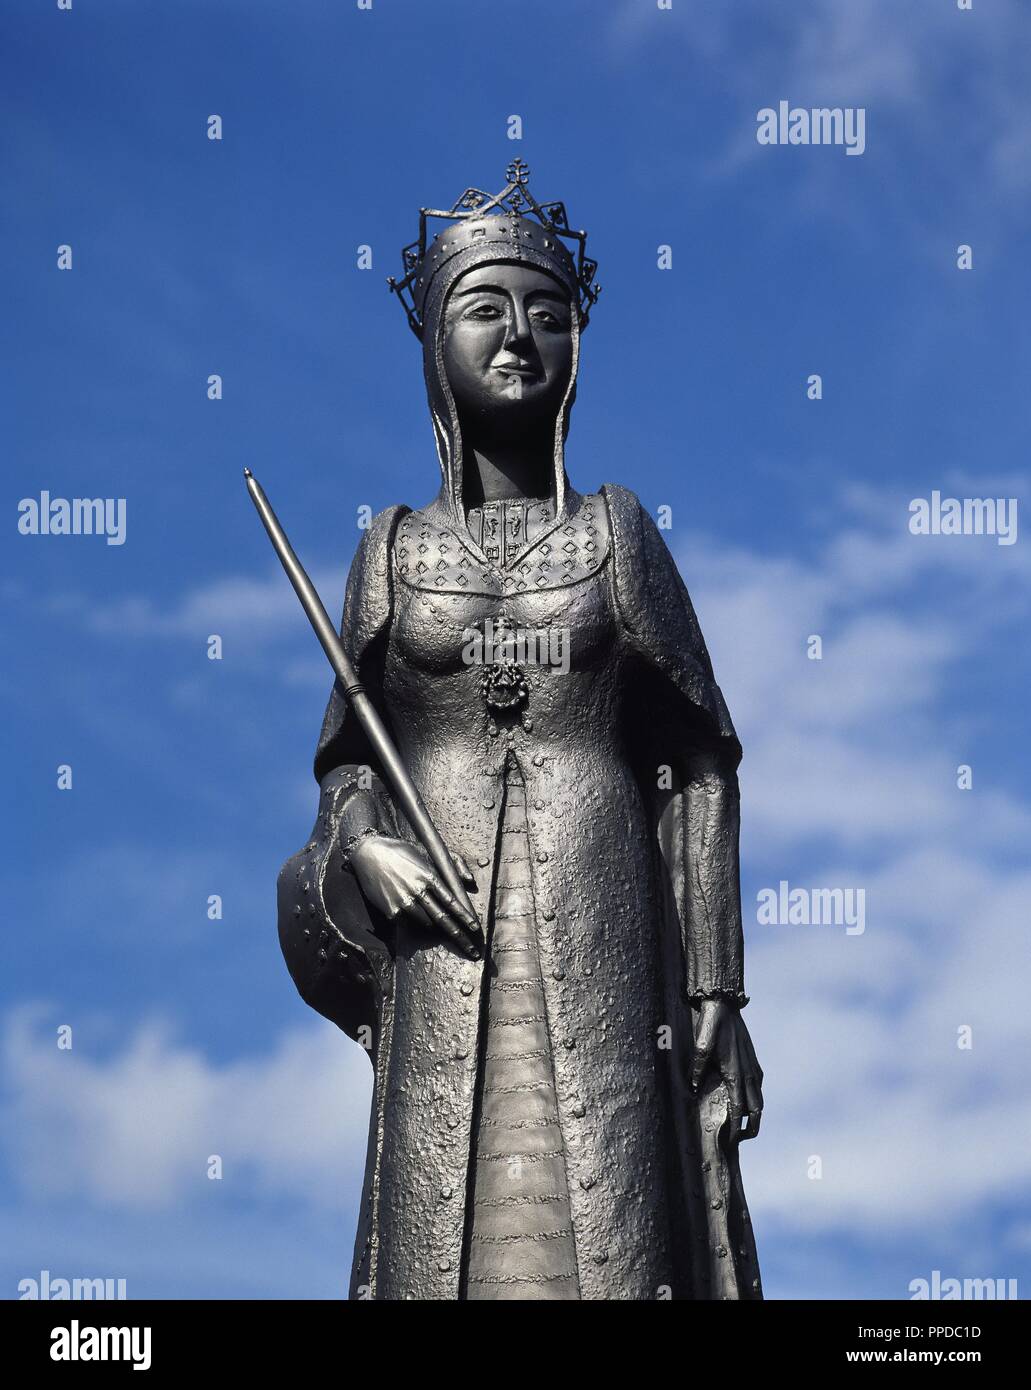 Isabella I (1451-1504). Queen of Castile from 1474-1504 and Queen consort of Aragon (1479-1504). Statue, detail. It is located at the native town of Madrigal de las Altas Torres. Sculptor M. Lo pez, 1982. Province of Avila. Spain. Stock Photo